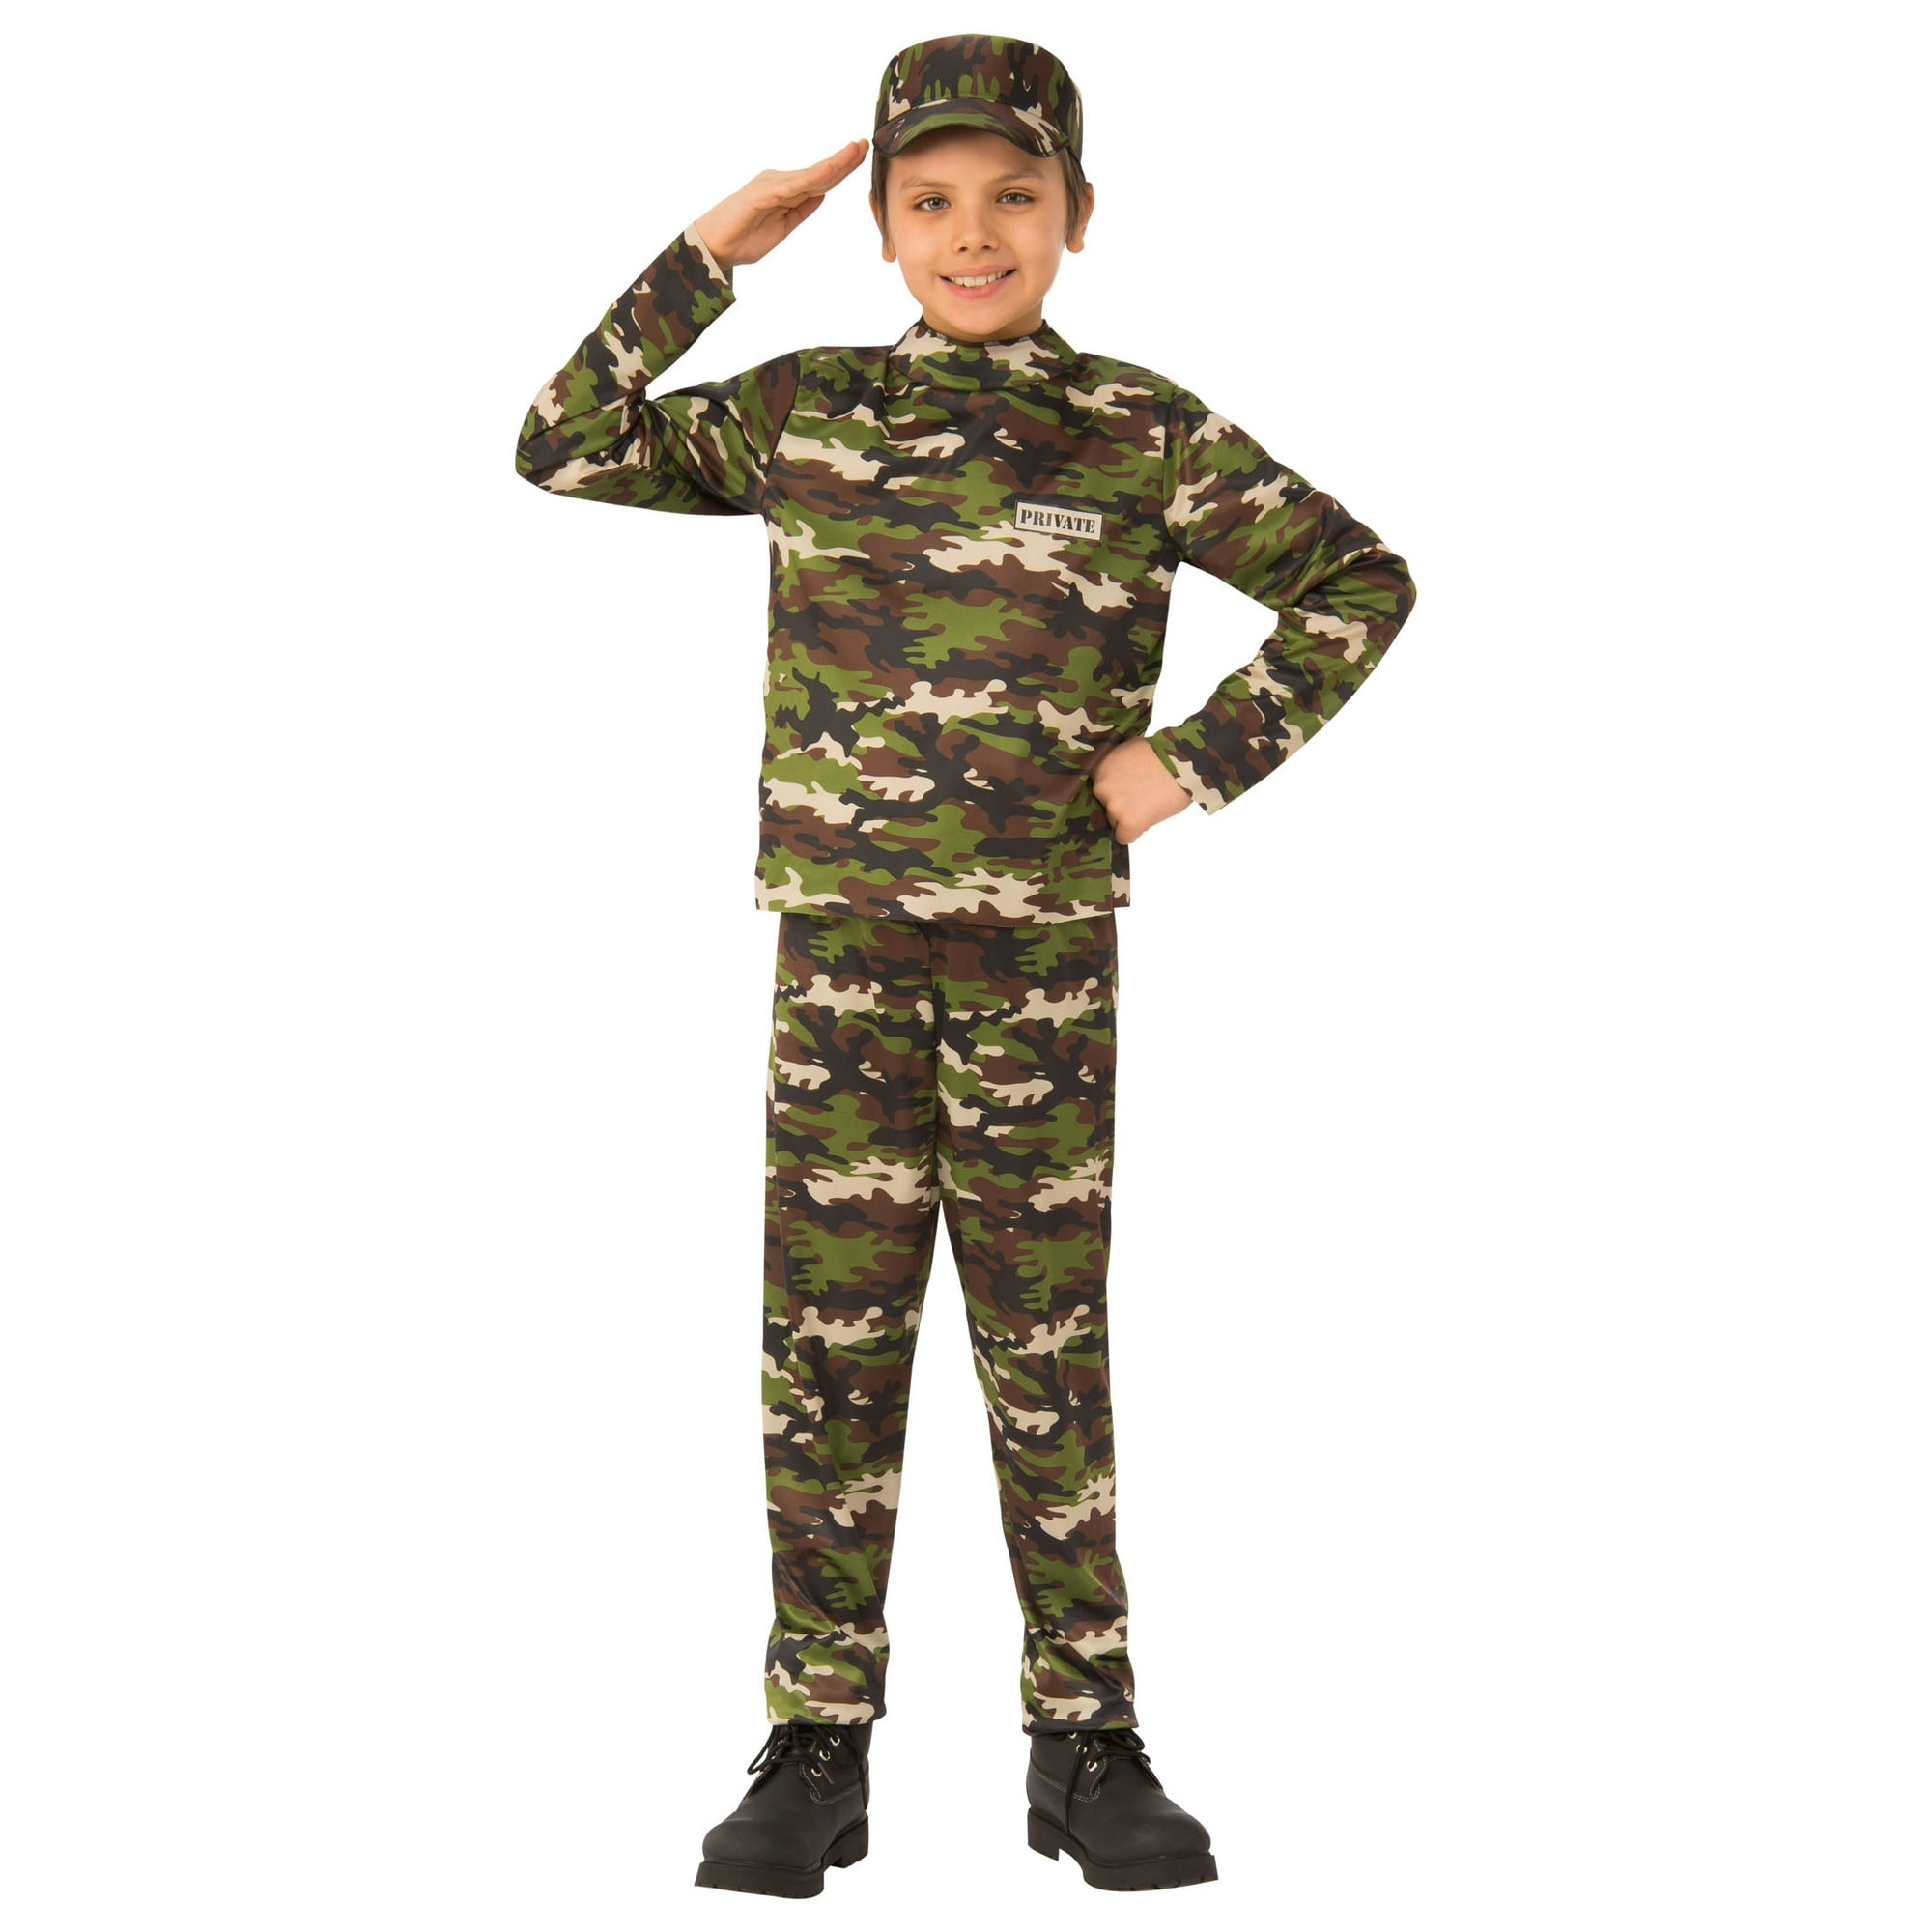 Boys Military Halloween Costume, Way to Celebrate, Size L